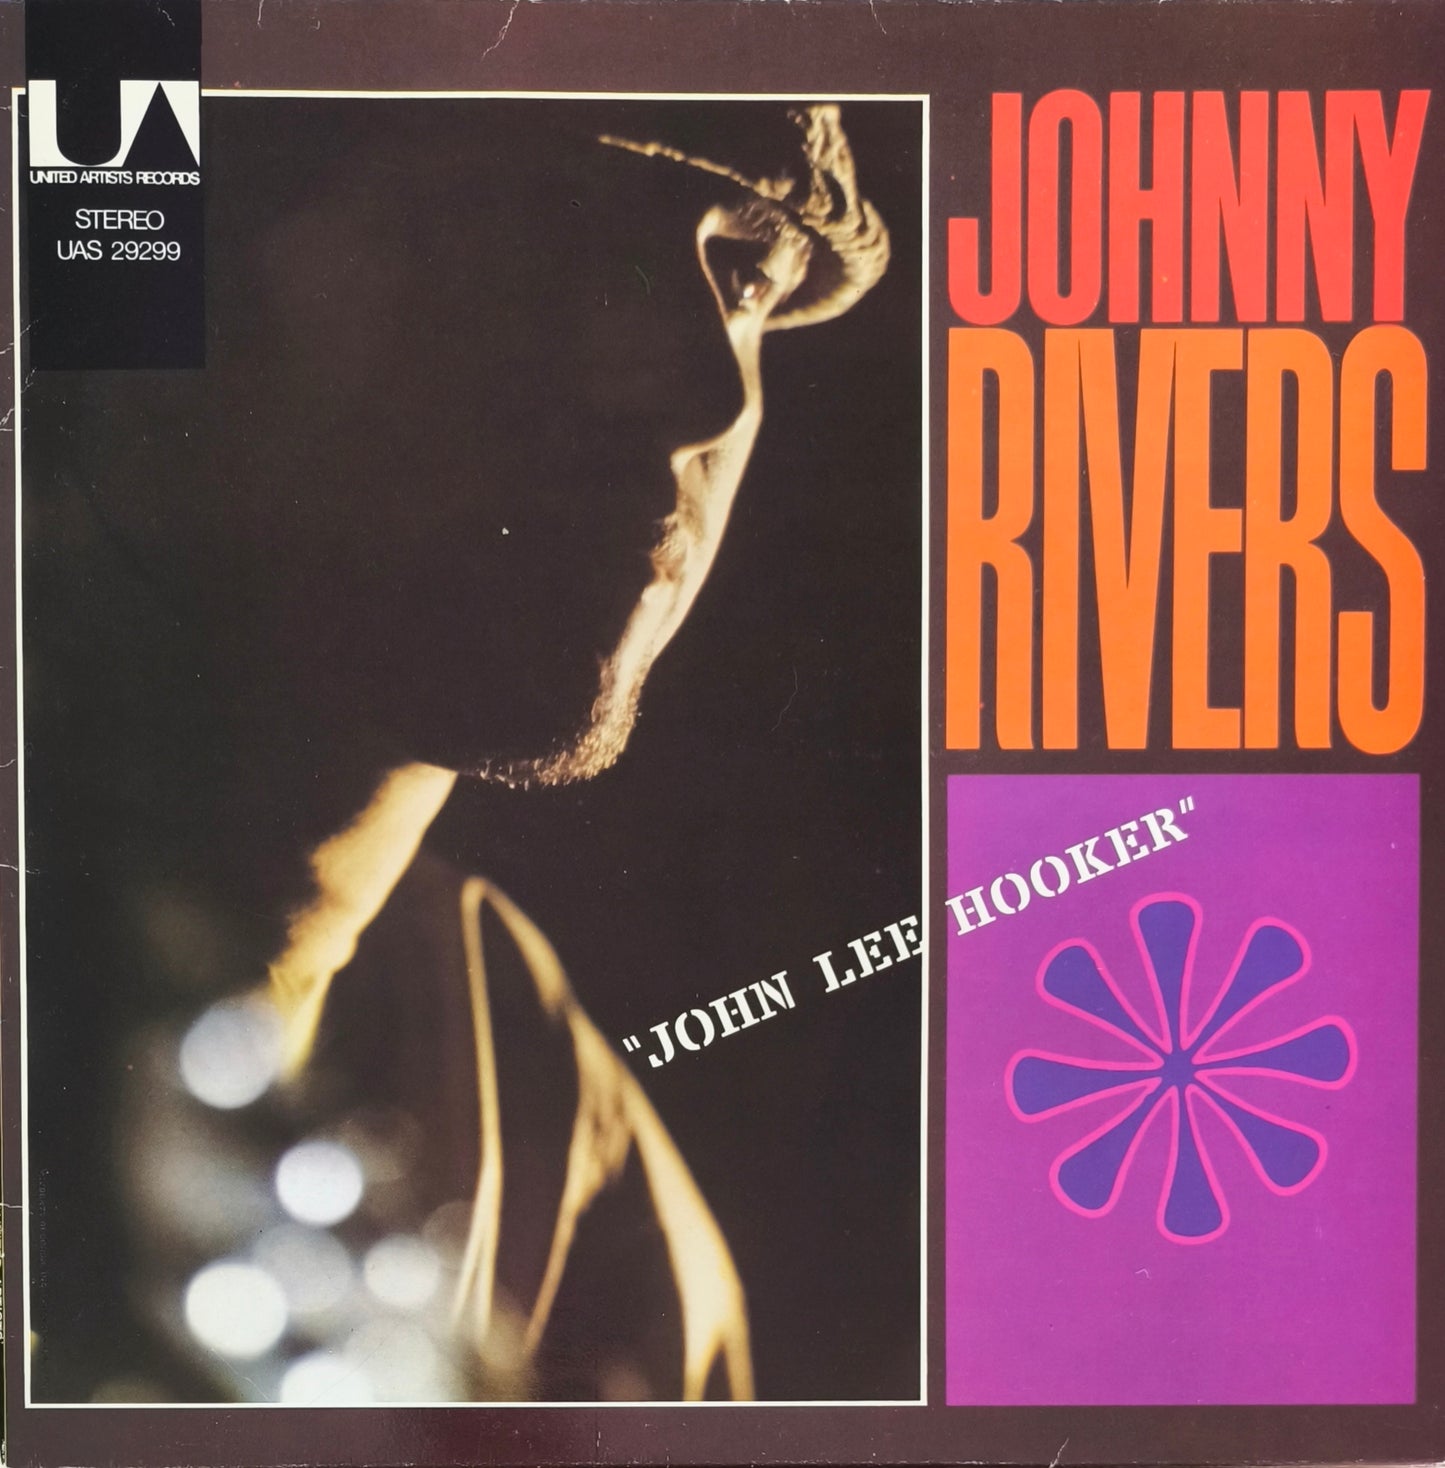 JOHNNY RIVERS - Whisky A Go-go Revisited